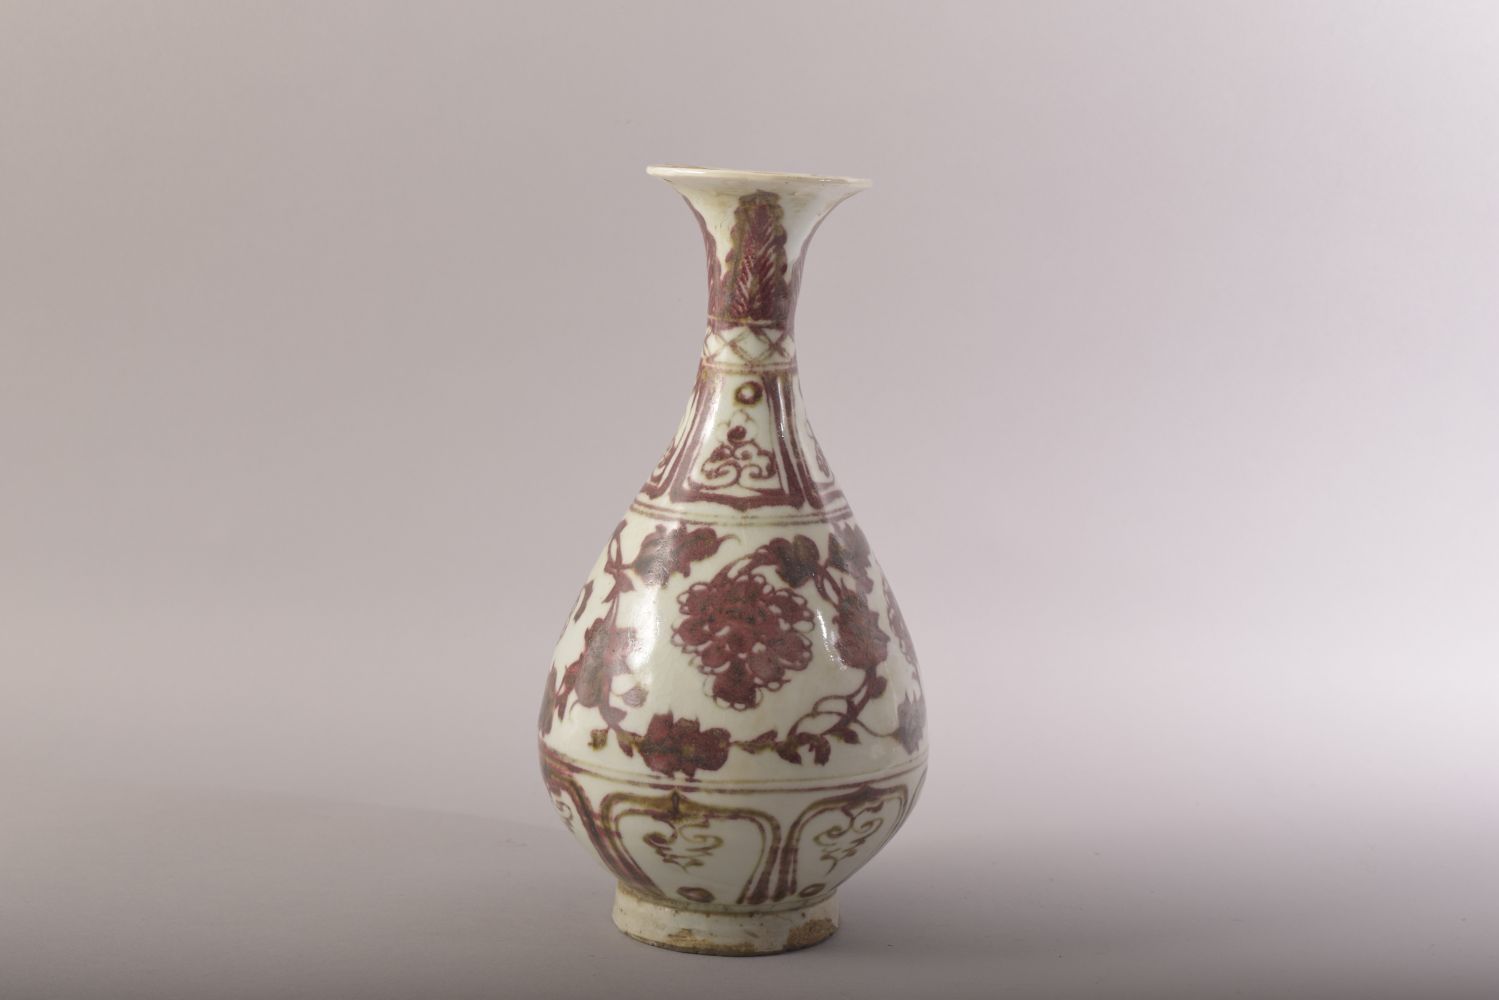 A CHINESE IRON RED AND WHITE GLAZED POTTERY VASE, decorated with floral motifs, 24.5cm high. - Image 4 of 6